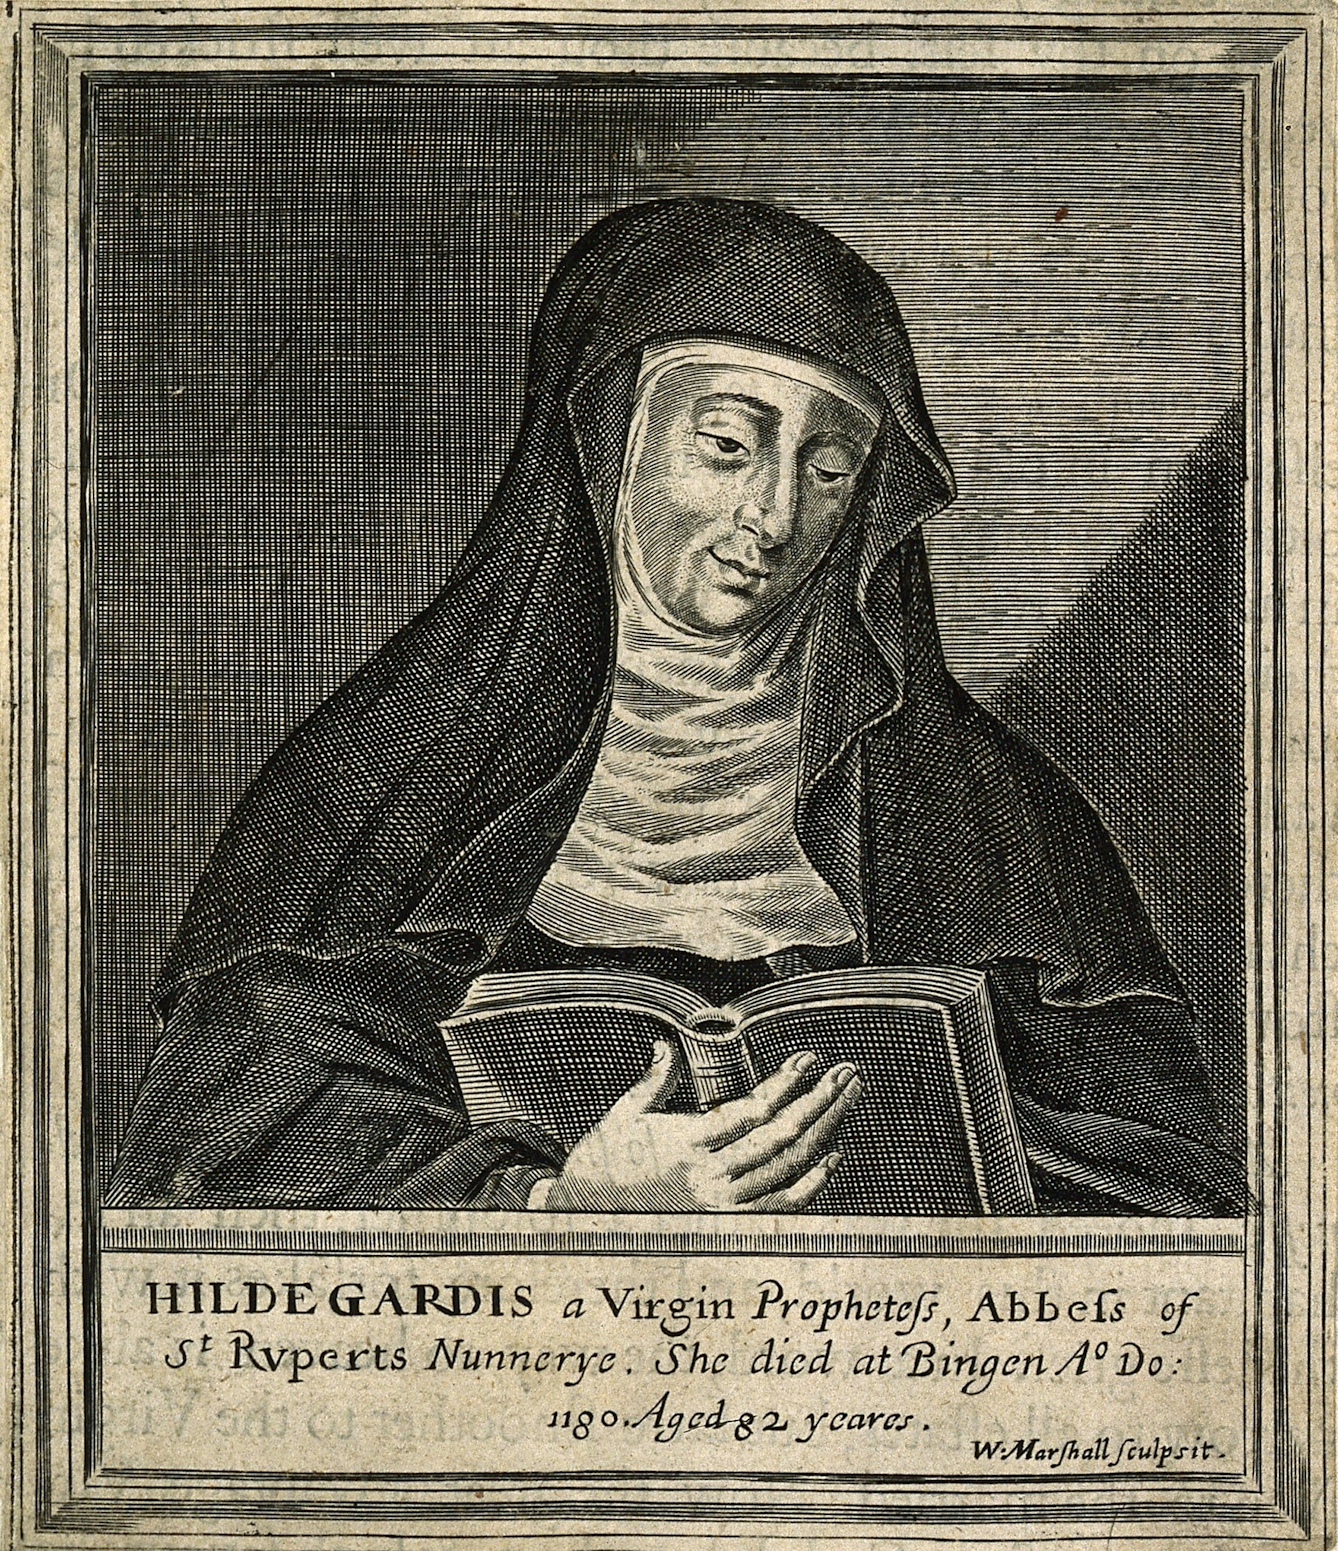 Black and white engraving of Hildegard von Bingen showing a woman wearing nun's clothing, reading a book. 